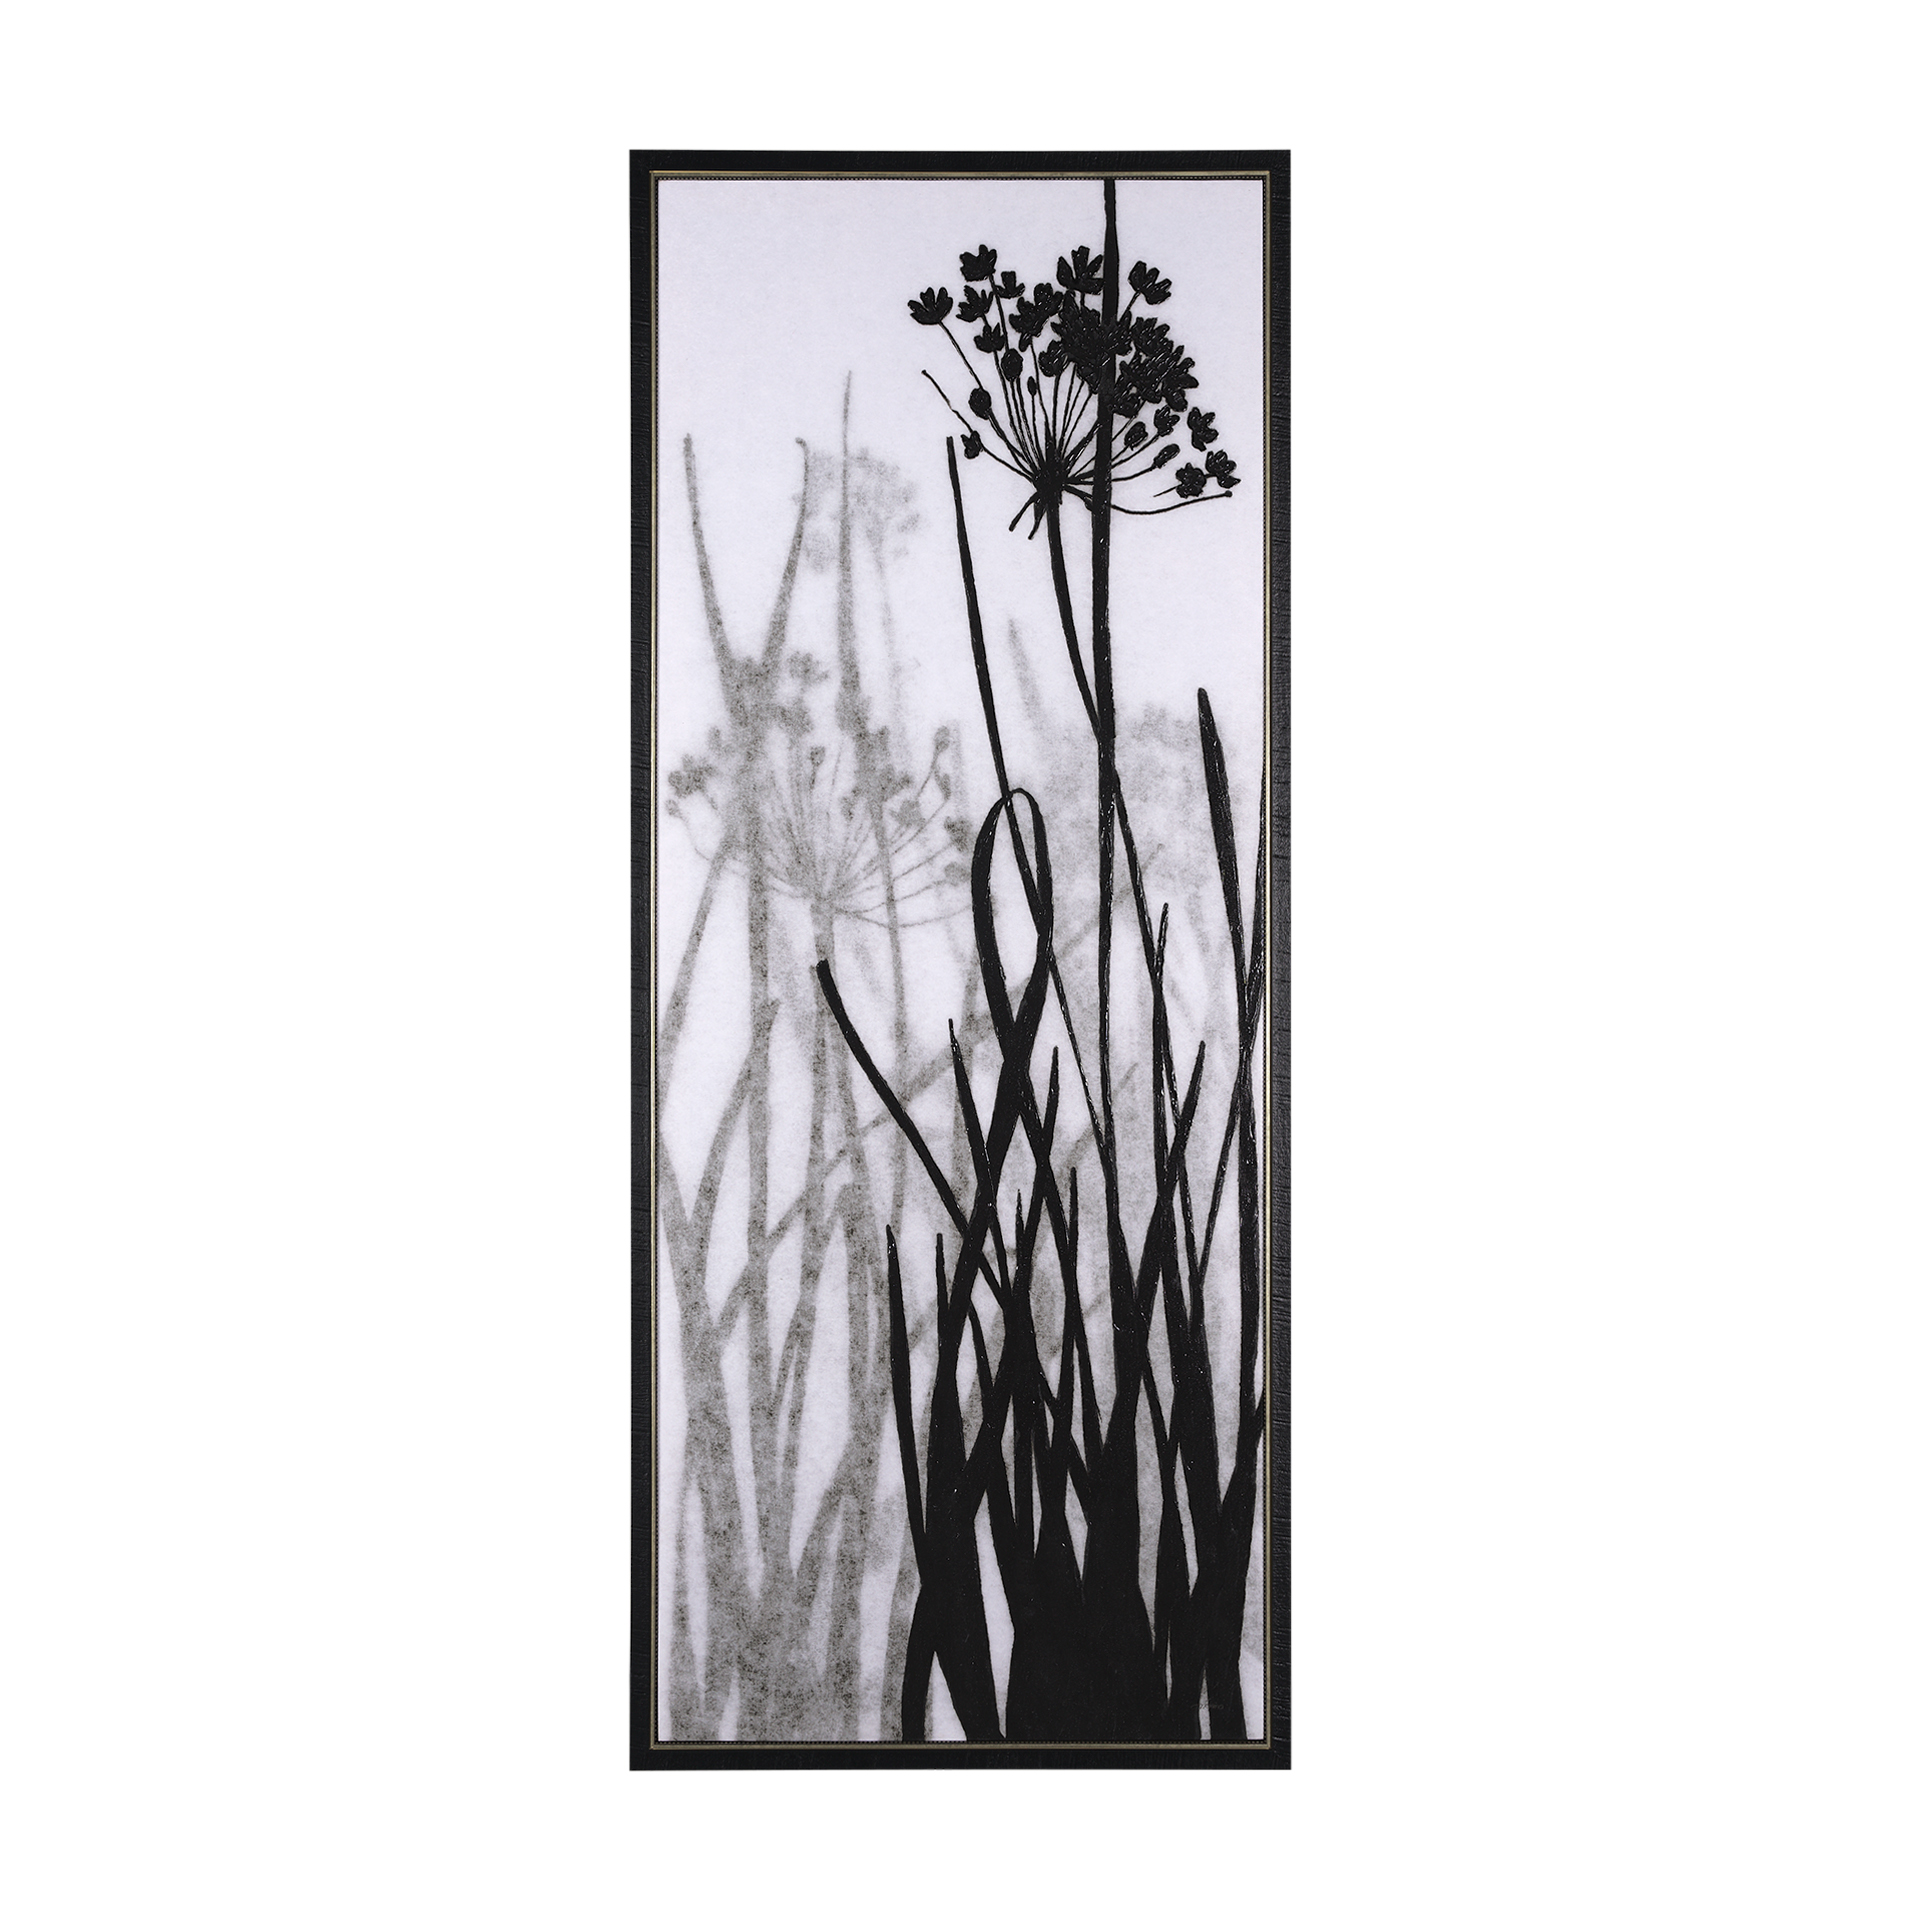 Floral Silhouette I (33 x 76)